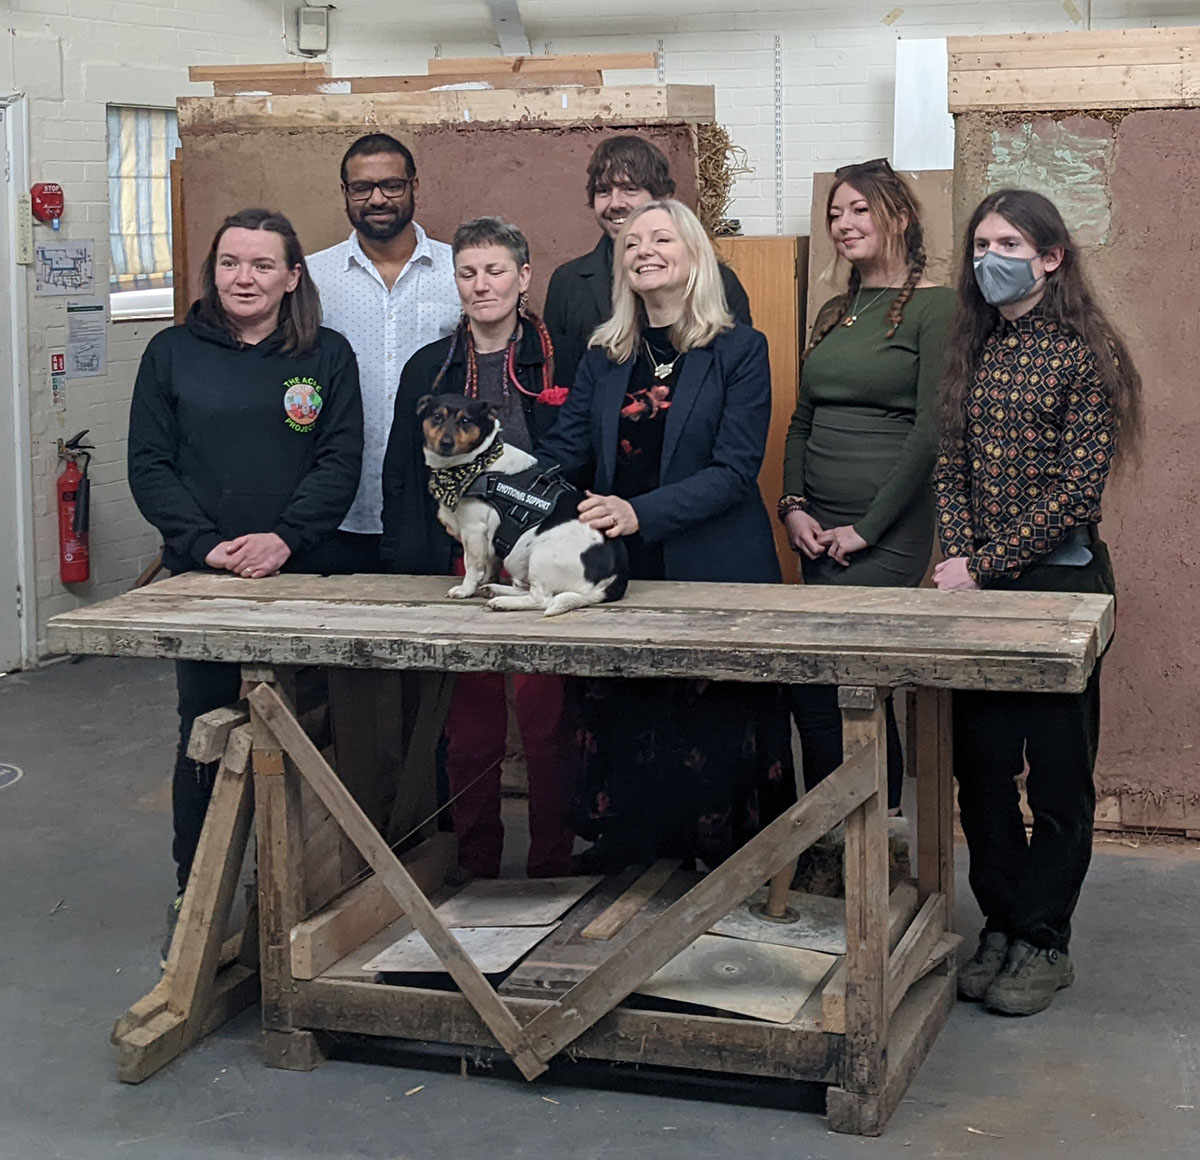 A picture (from L-R) of Anni, Alvin, Laura, the Tracy Brabin the Mayor of West Yorkshire, Cllr Scott Patient, Lola, and Evan in the workshop space with strawbale insulation blocks in the background. Reggie, a Jack Russell terrier, is on the workbench and Tracy is stroking him.